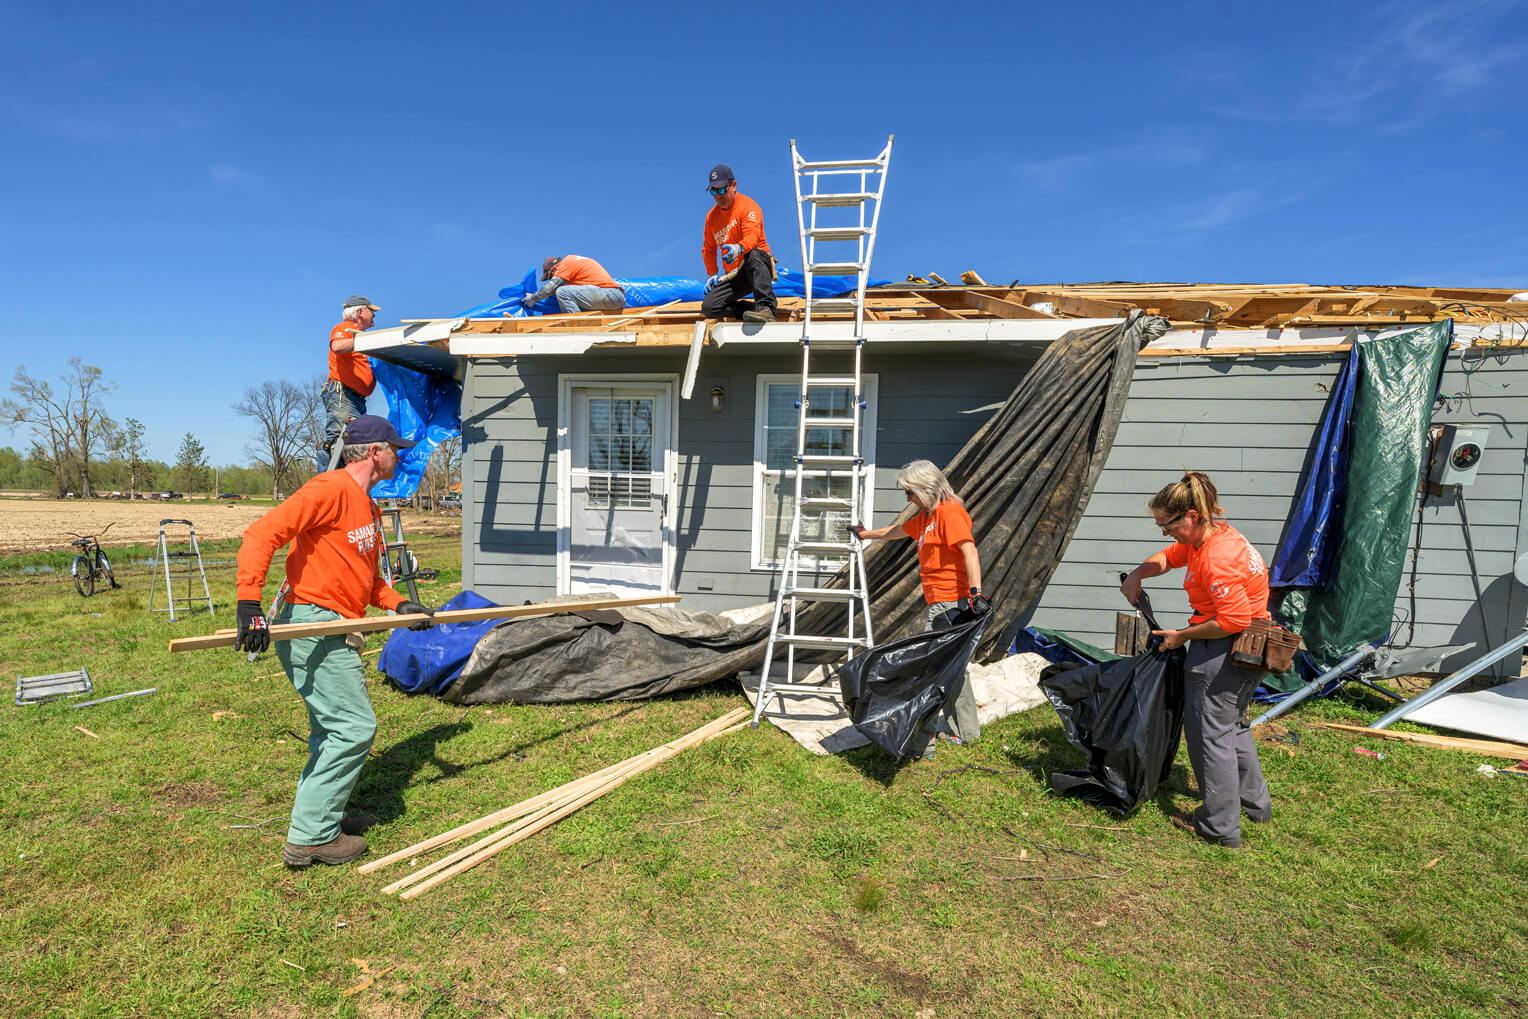 Volunteers are hard at work in Mississippi tarping damaged roofs and clear trees and debris from homes and properties.